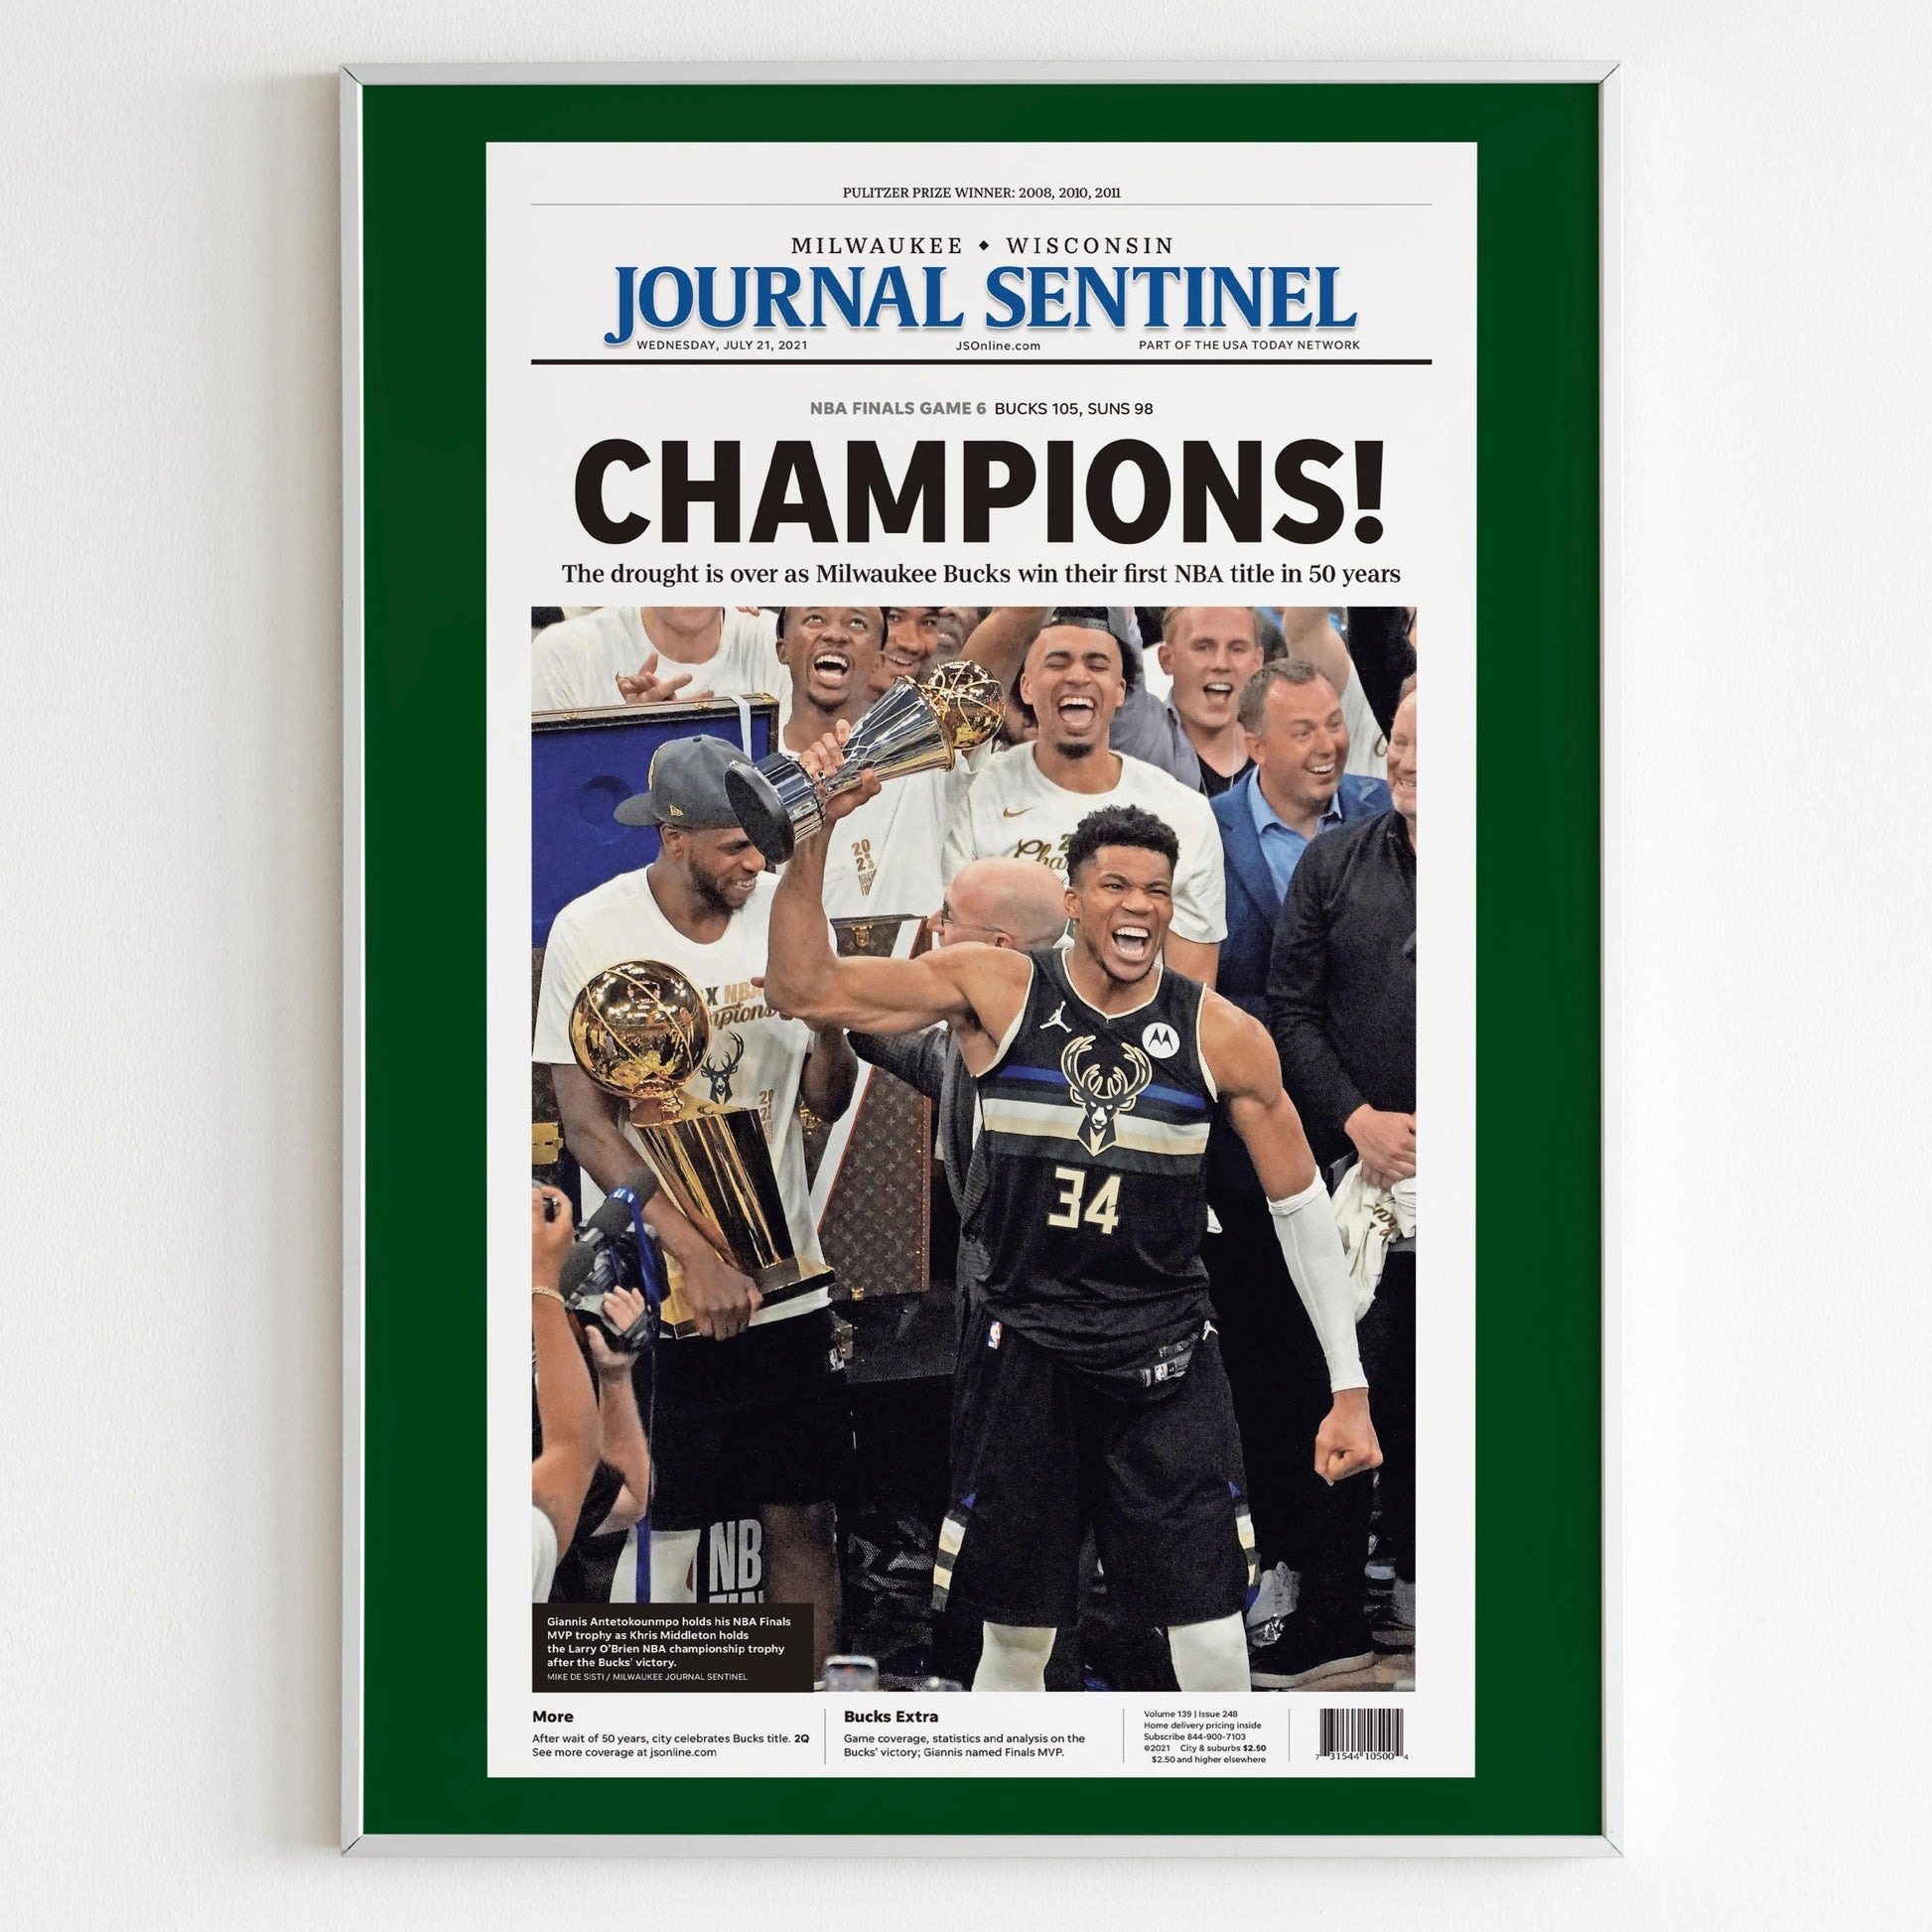 Milwaukee Bucks 2021 NBA Champions Front Cover Journal Sentinel Newspaper Poster, Basketball Print, Magazine Front Page